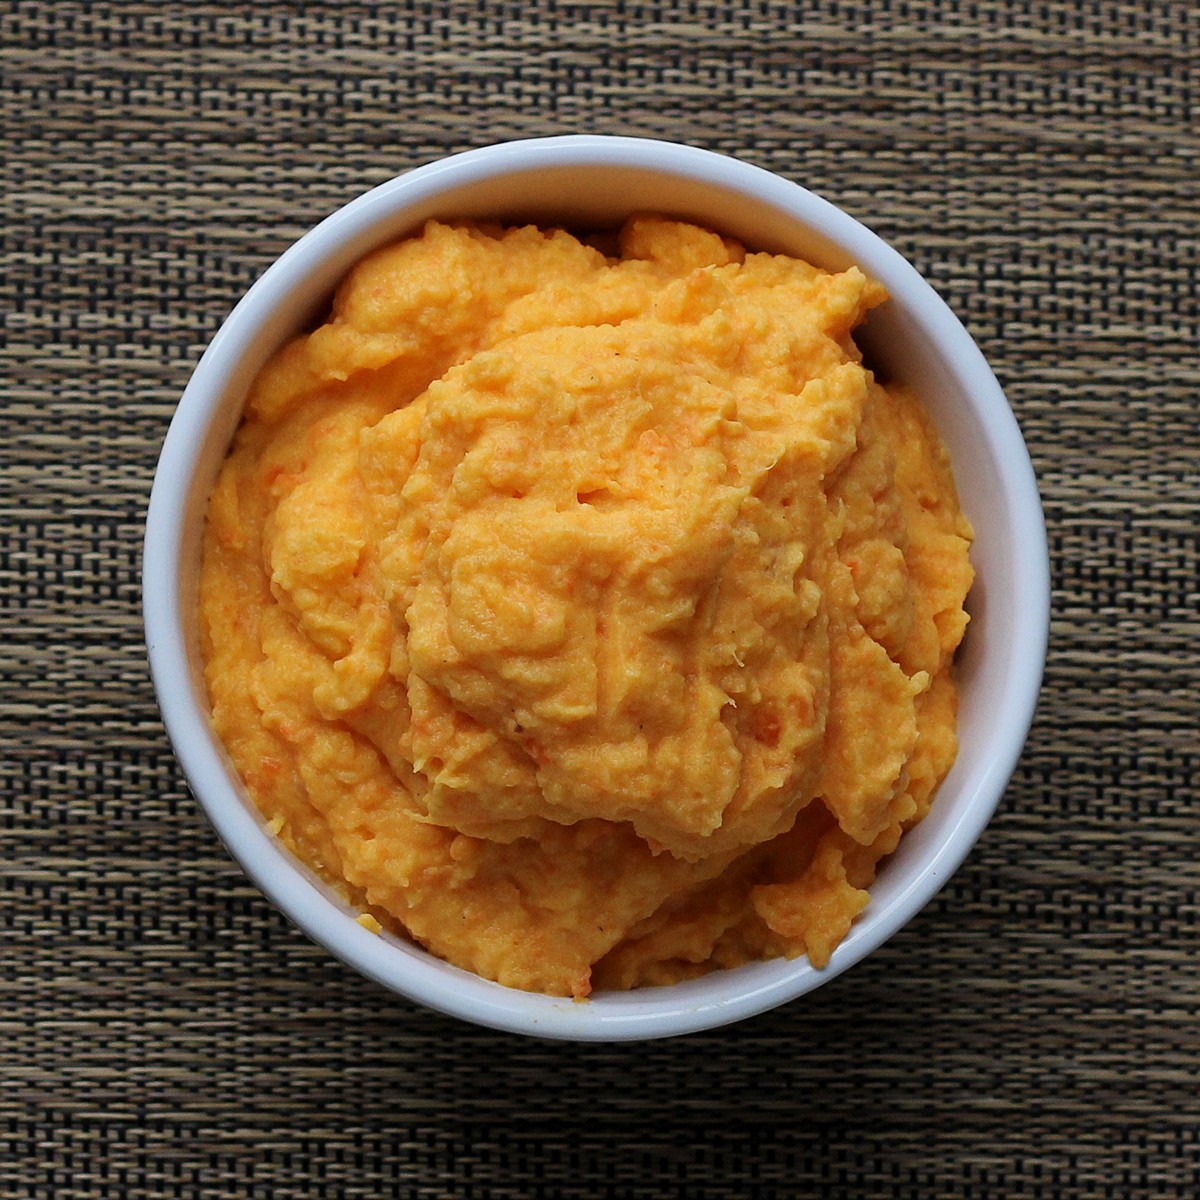 Cookistry: Mashed Carrot and Rutabaga (Swede)